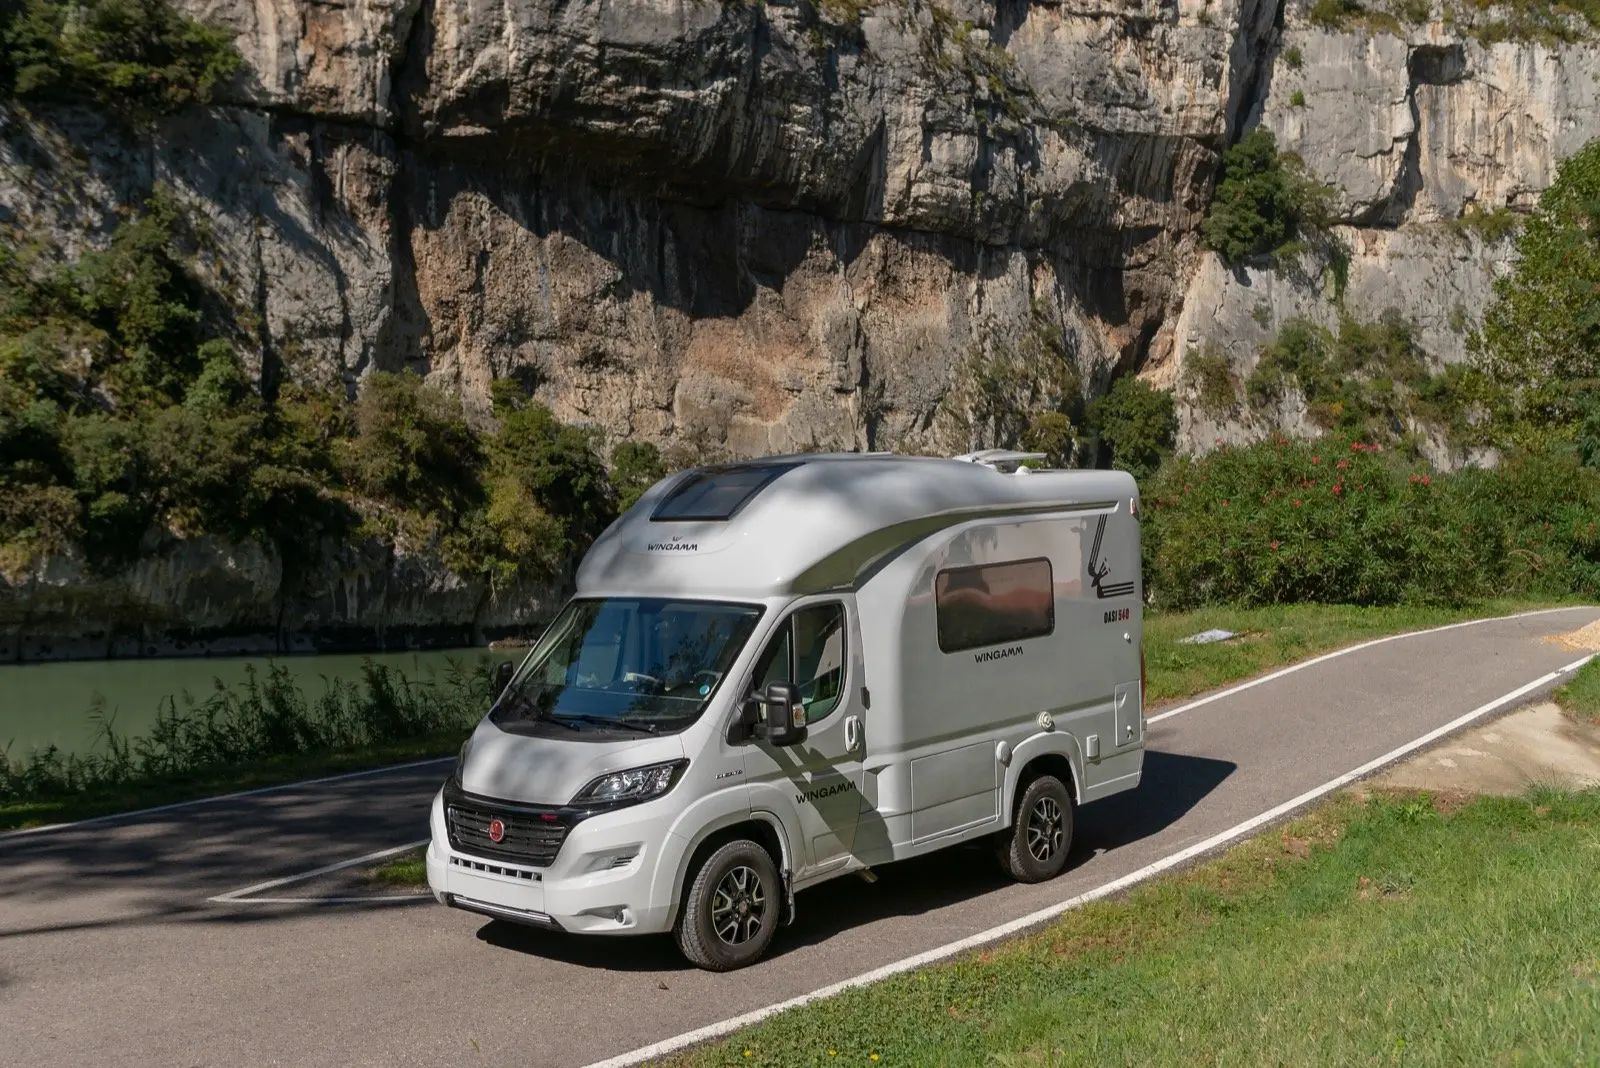 Oasi 540 small luxury campervan compact under 5 6m